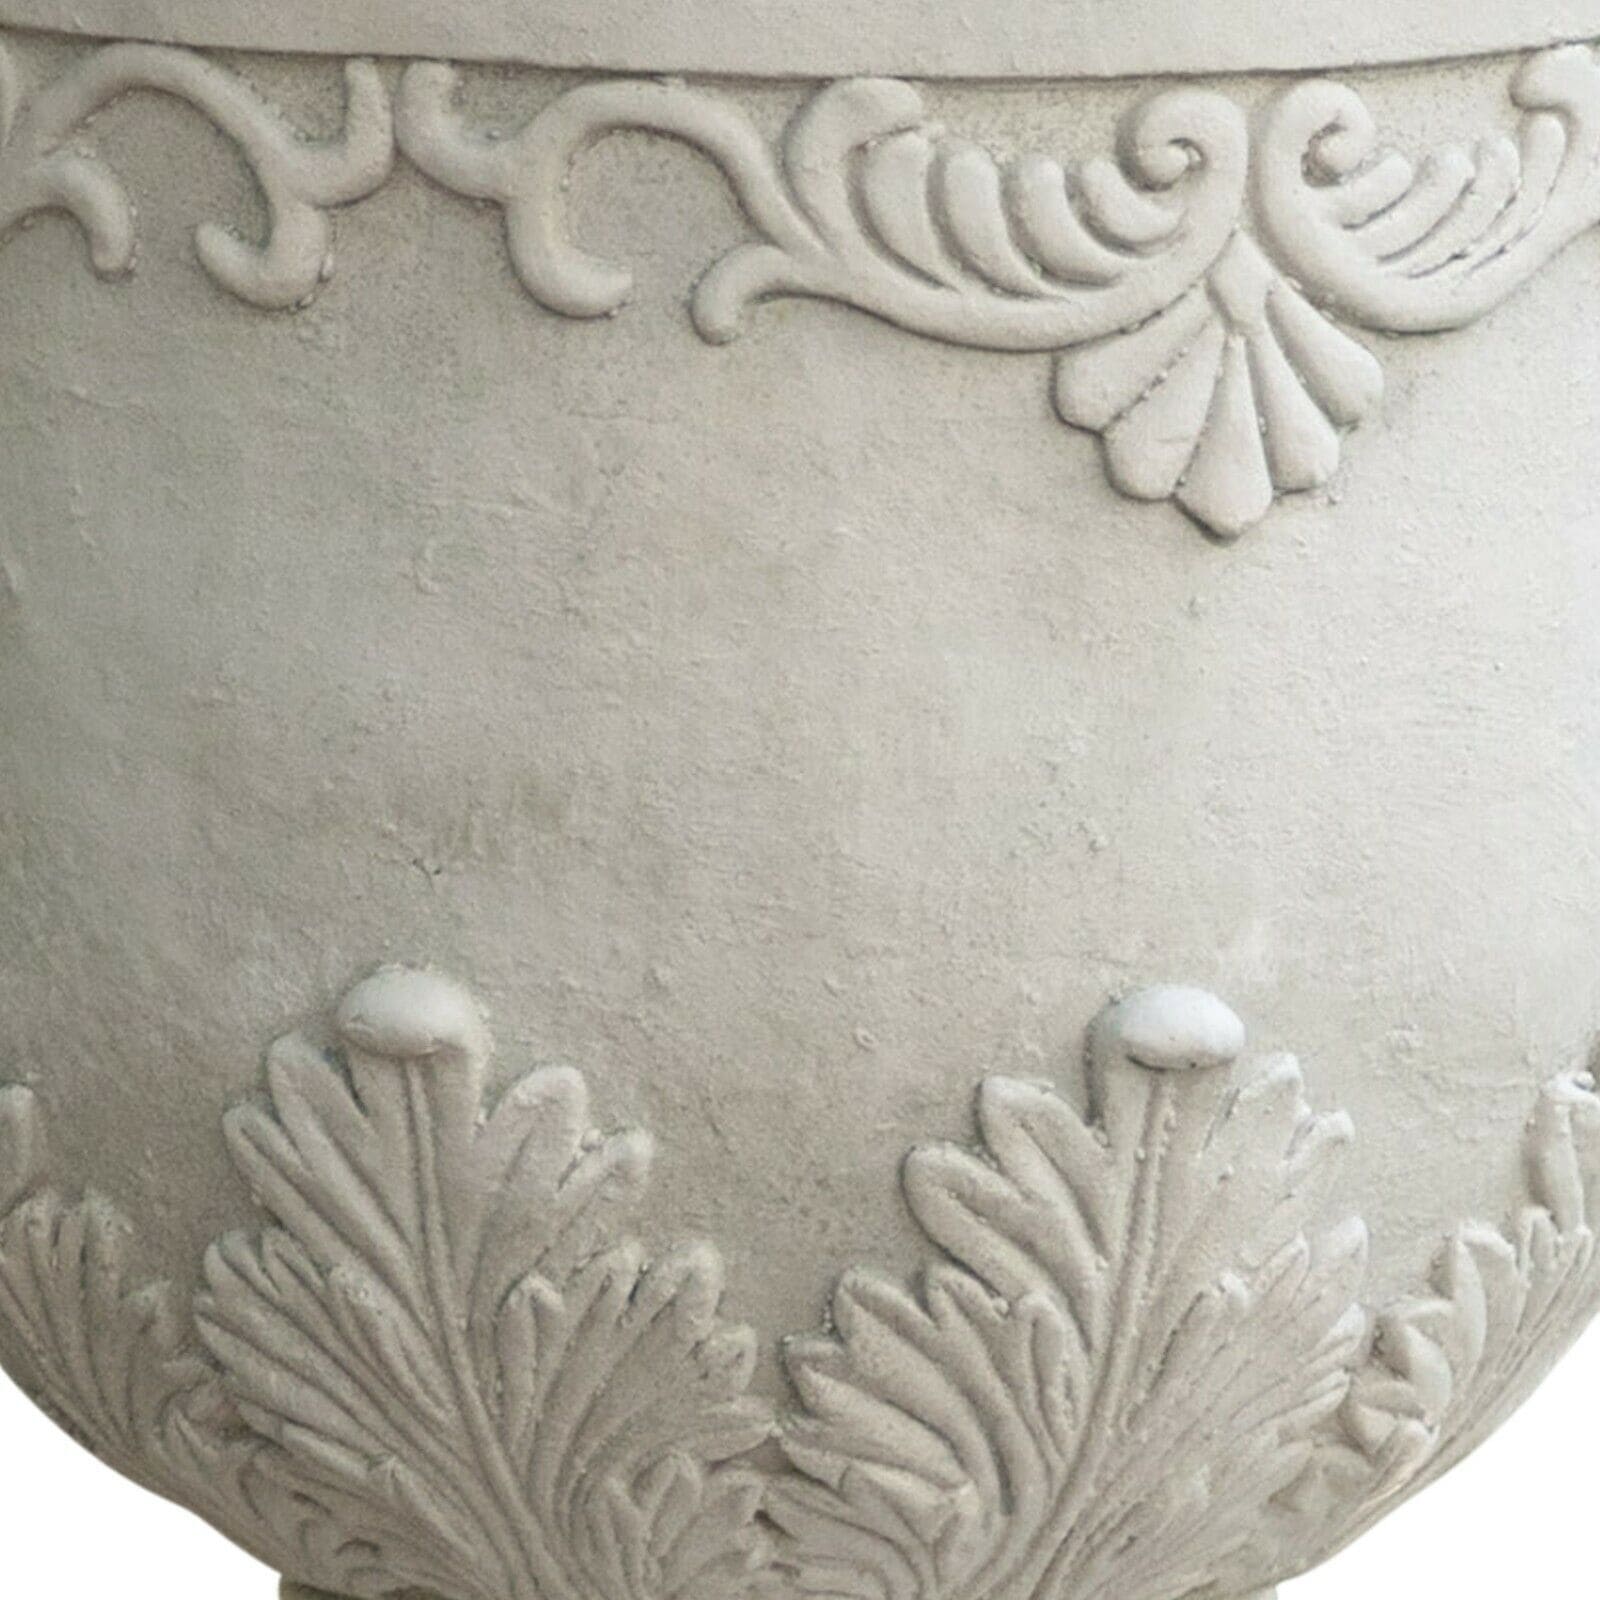 A white planter with a decorative design on it.